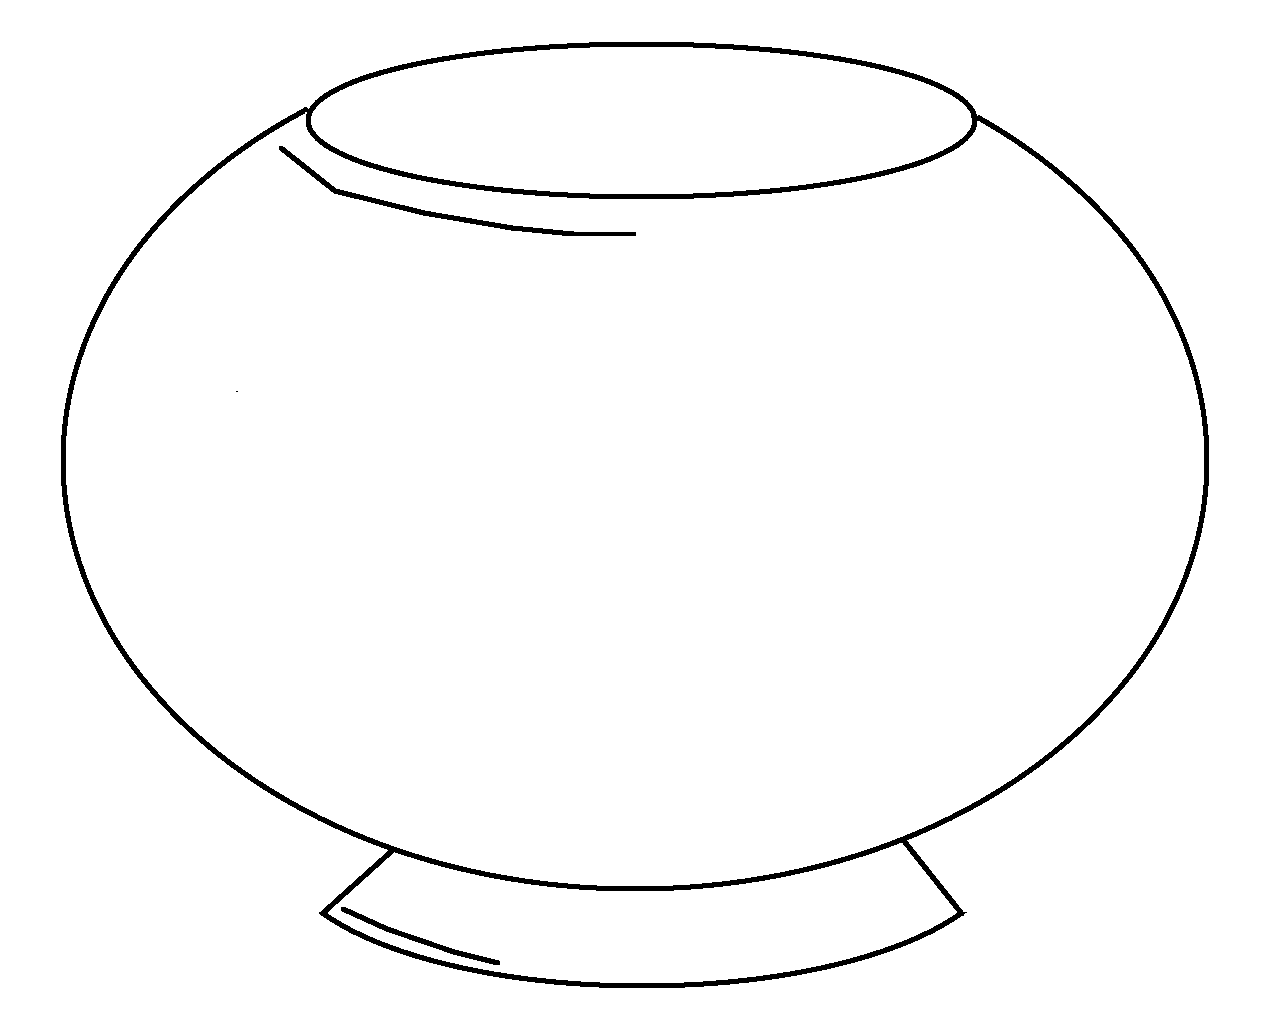 fishbowl-coloring-page.png